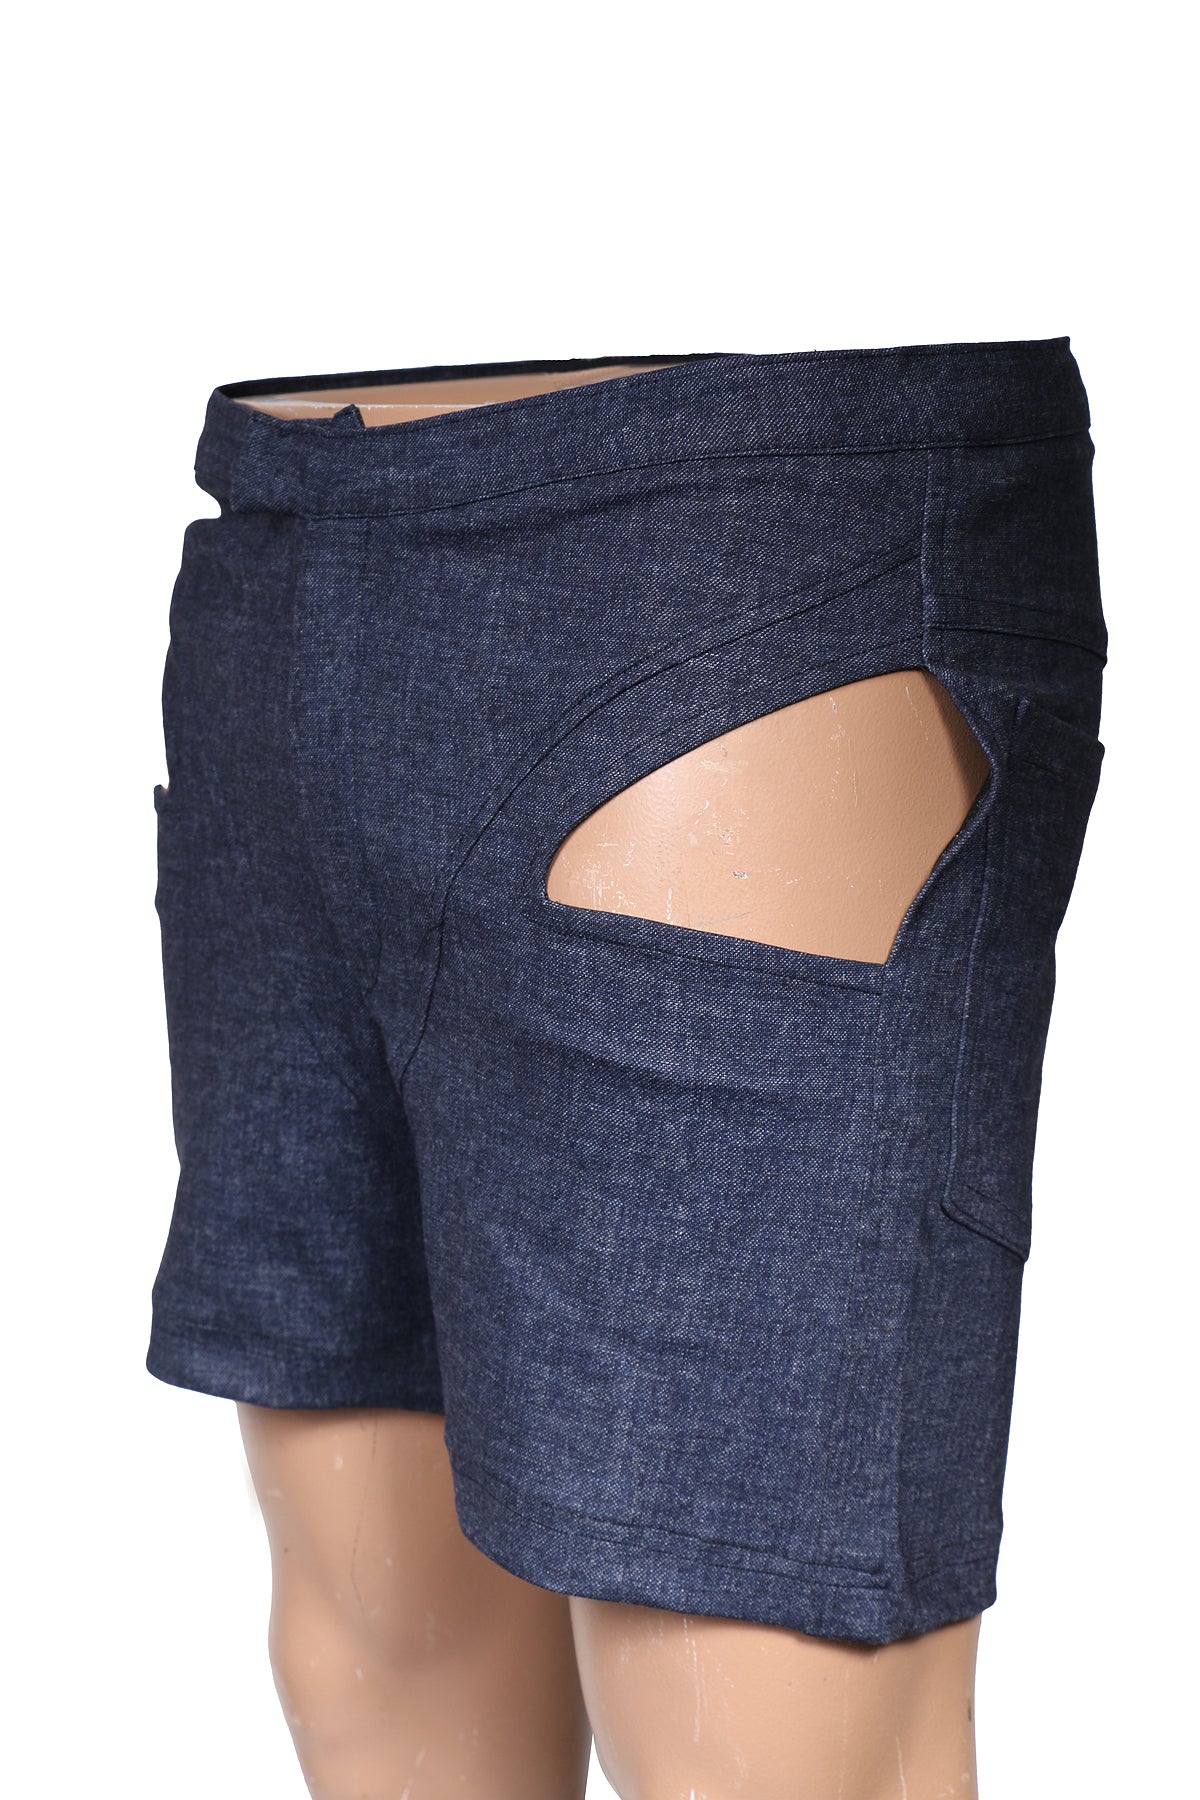 Short navy cut-out jeans for HIM